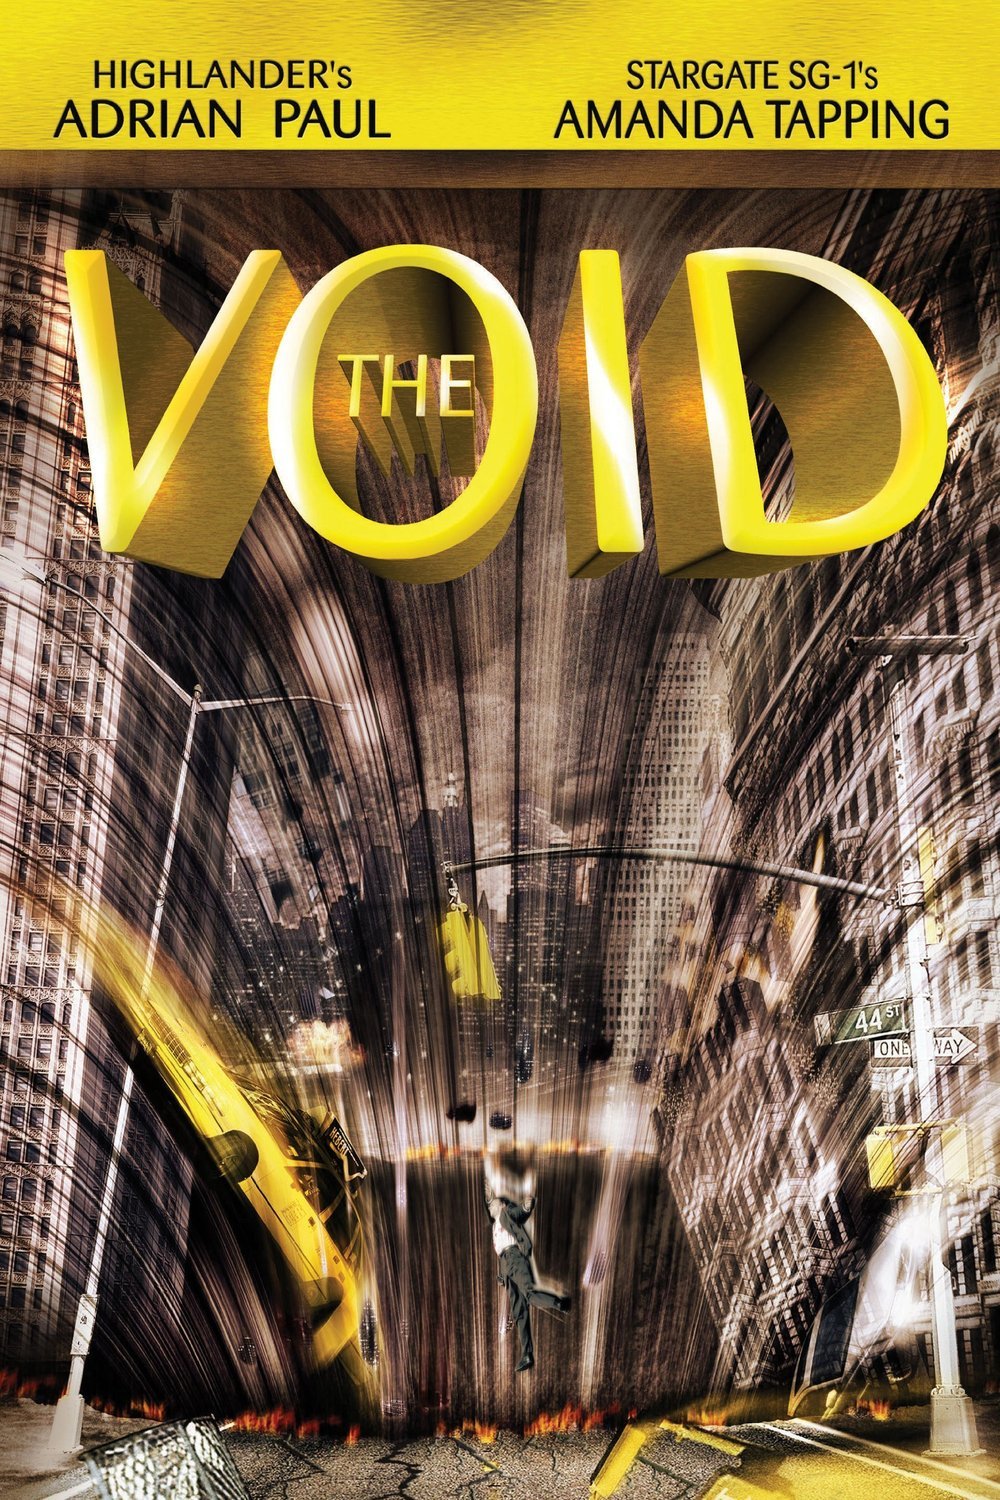 Poster of the movie The Void